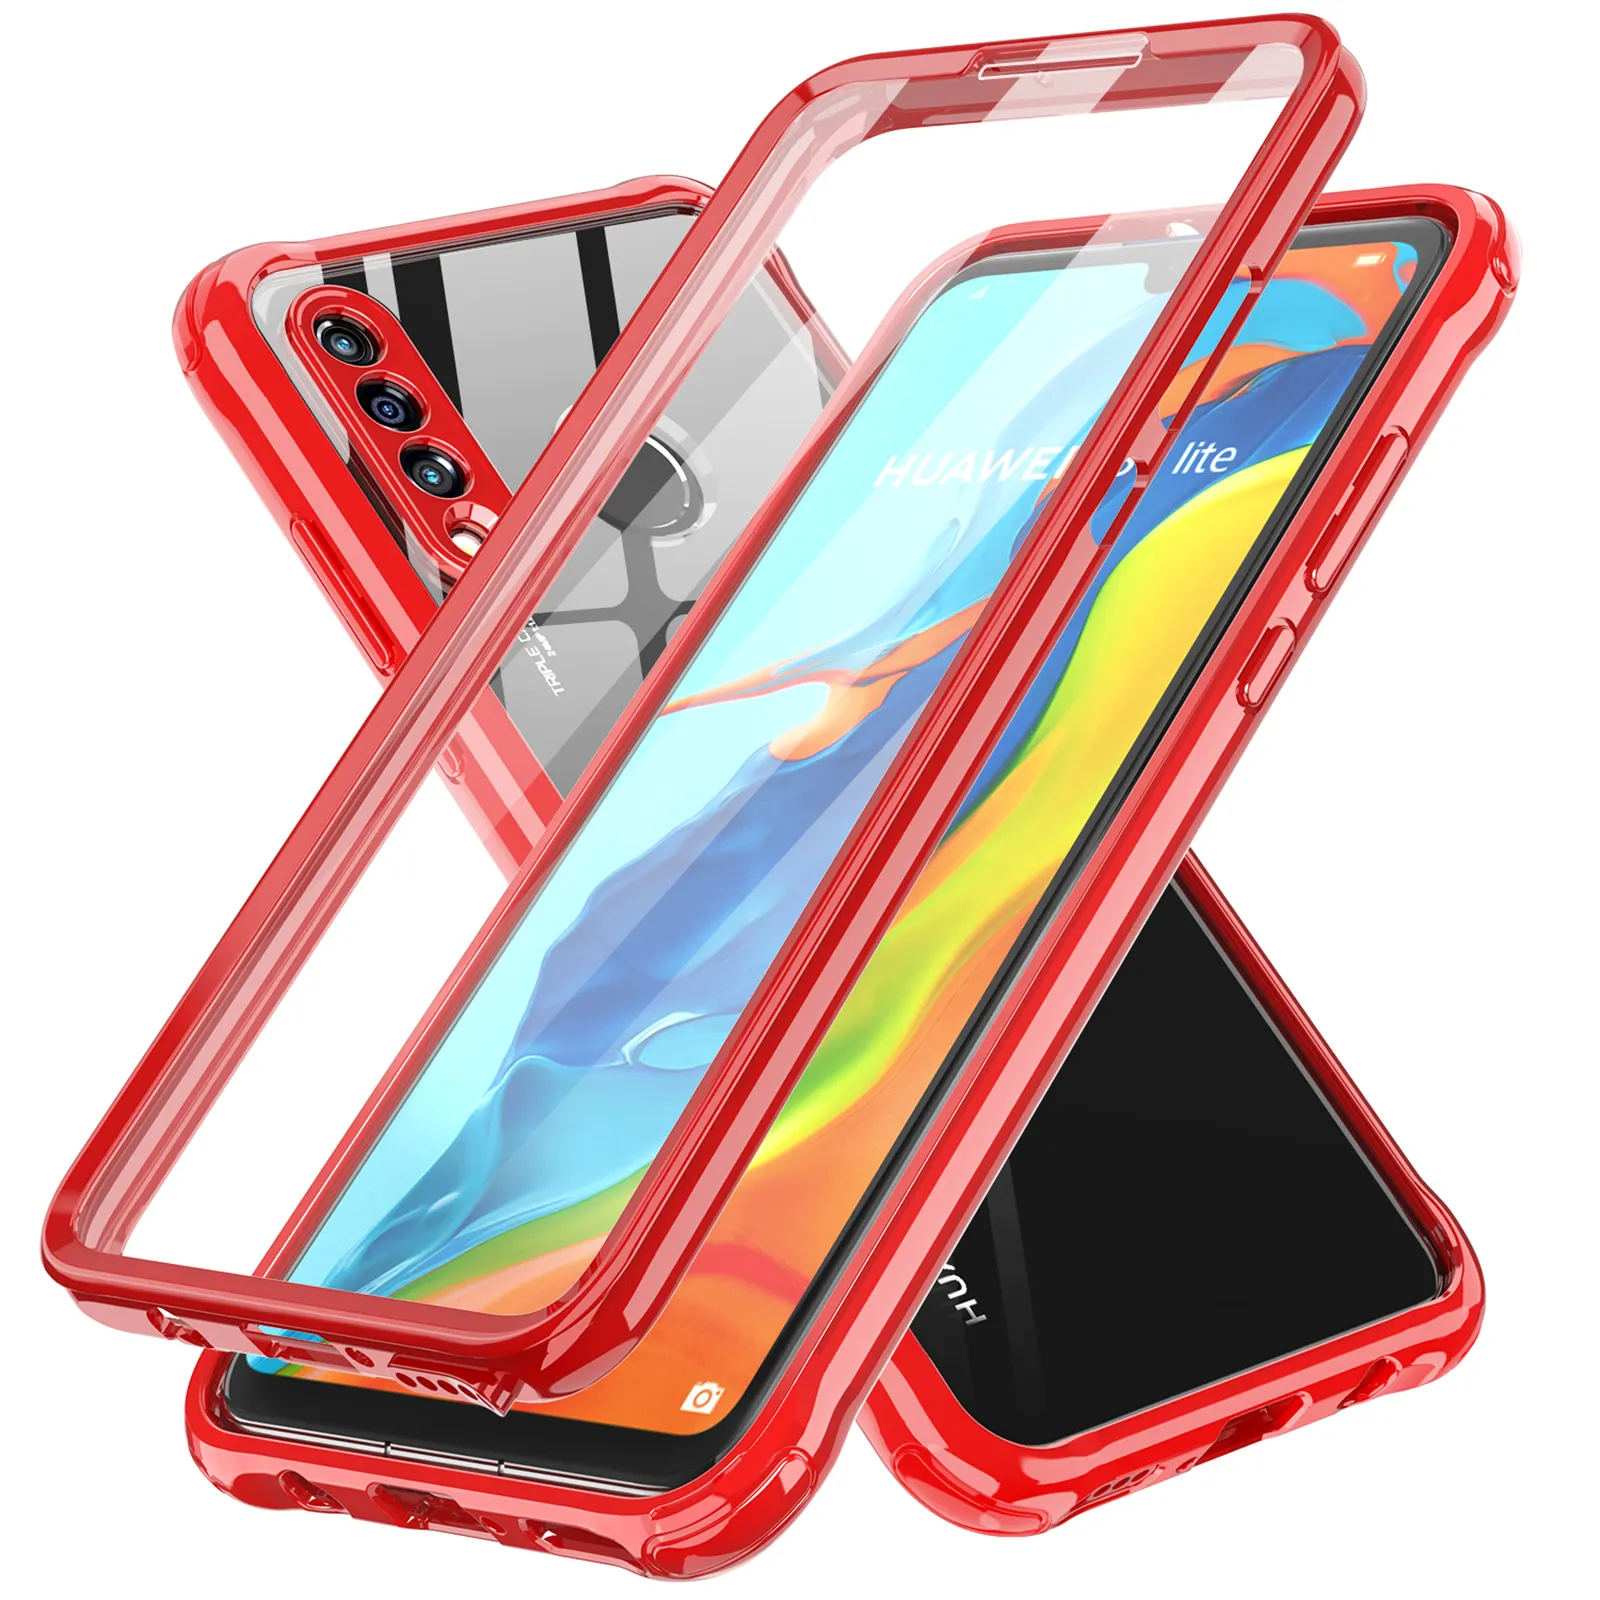 Leyi 2 in 1 clear anti scratch double sided phone case for huawei mate 9 cover itel vision back cover girls phone camera cover